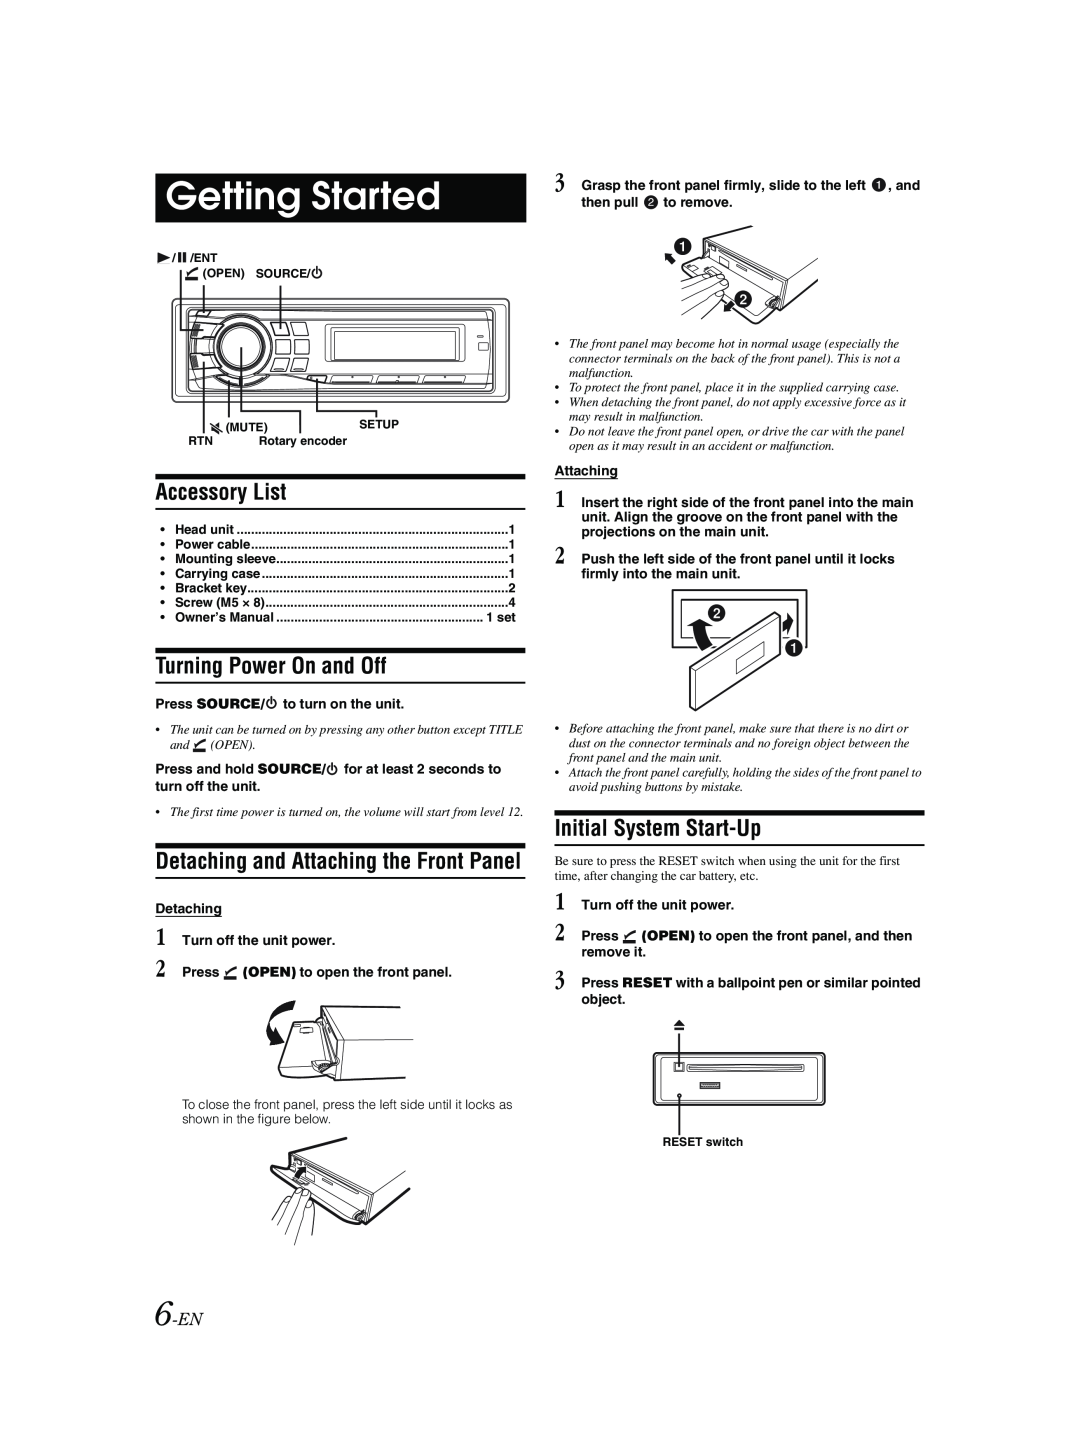 Alpine CDE-9881 owner manual Getting Started, Accessory List, Turning Power On and Off, Initial System Start-Up, 6-EN 